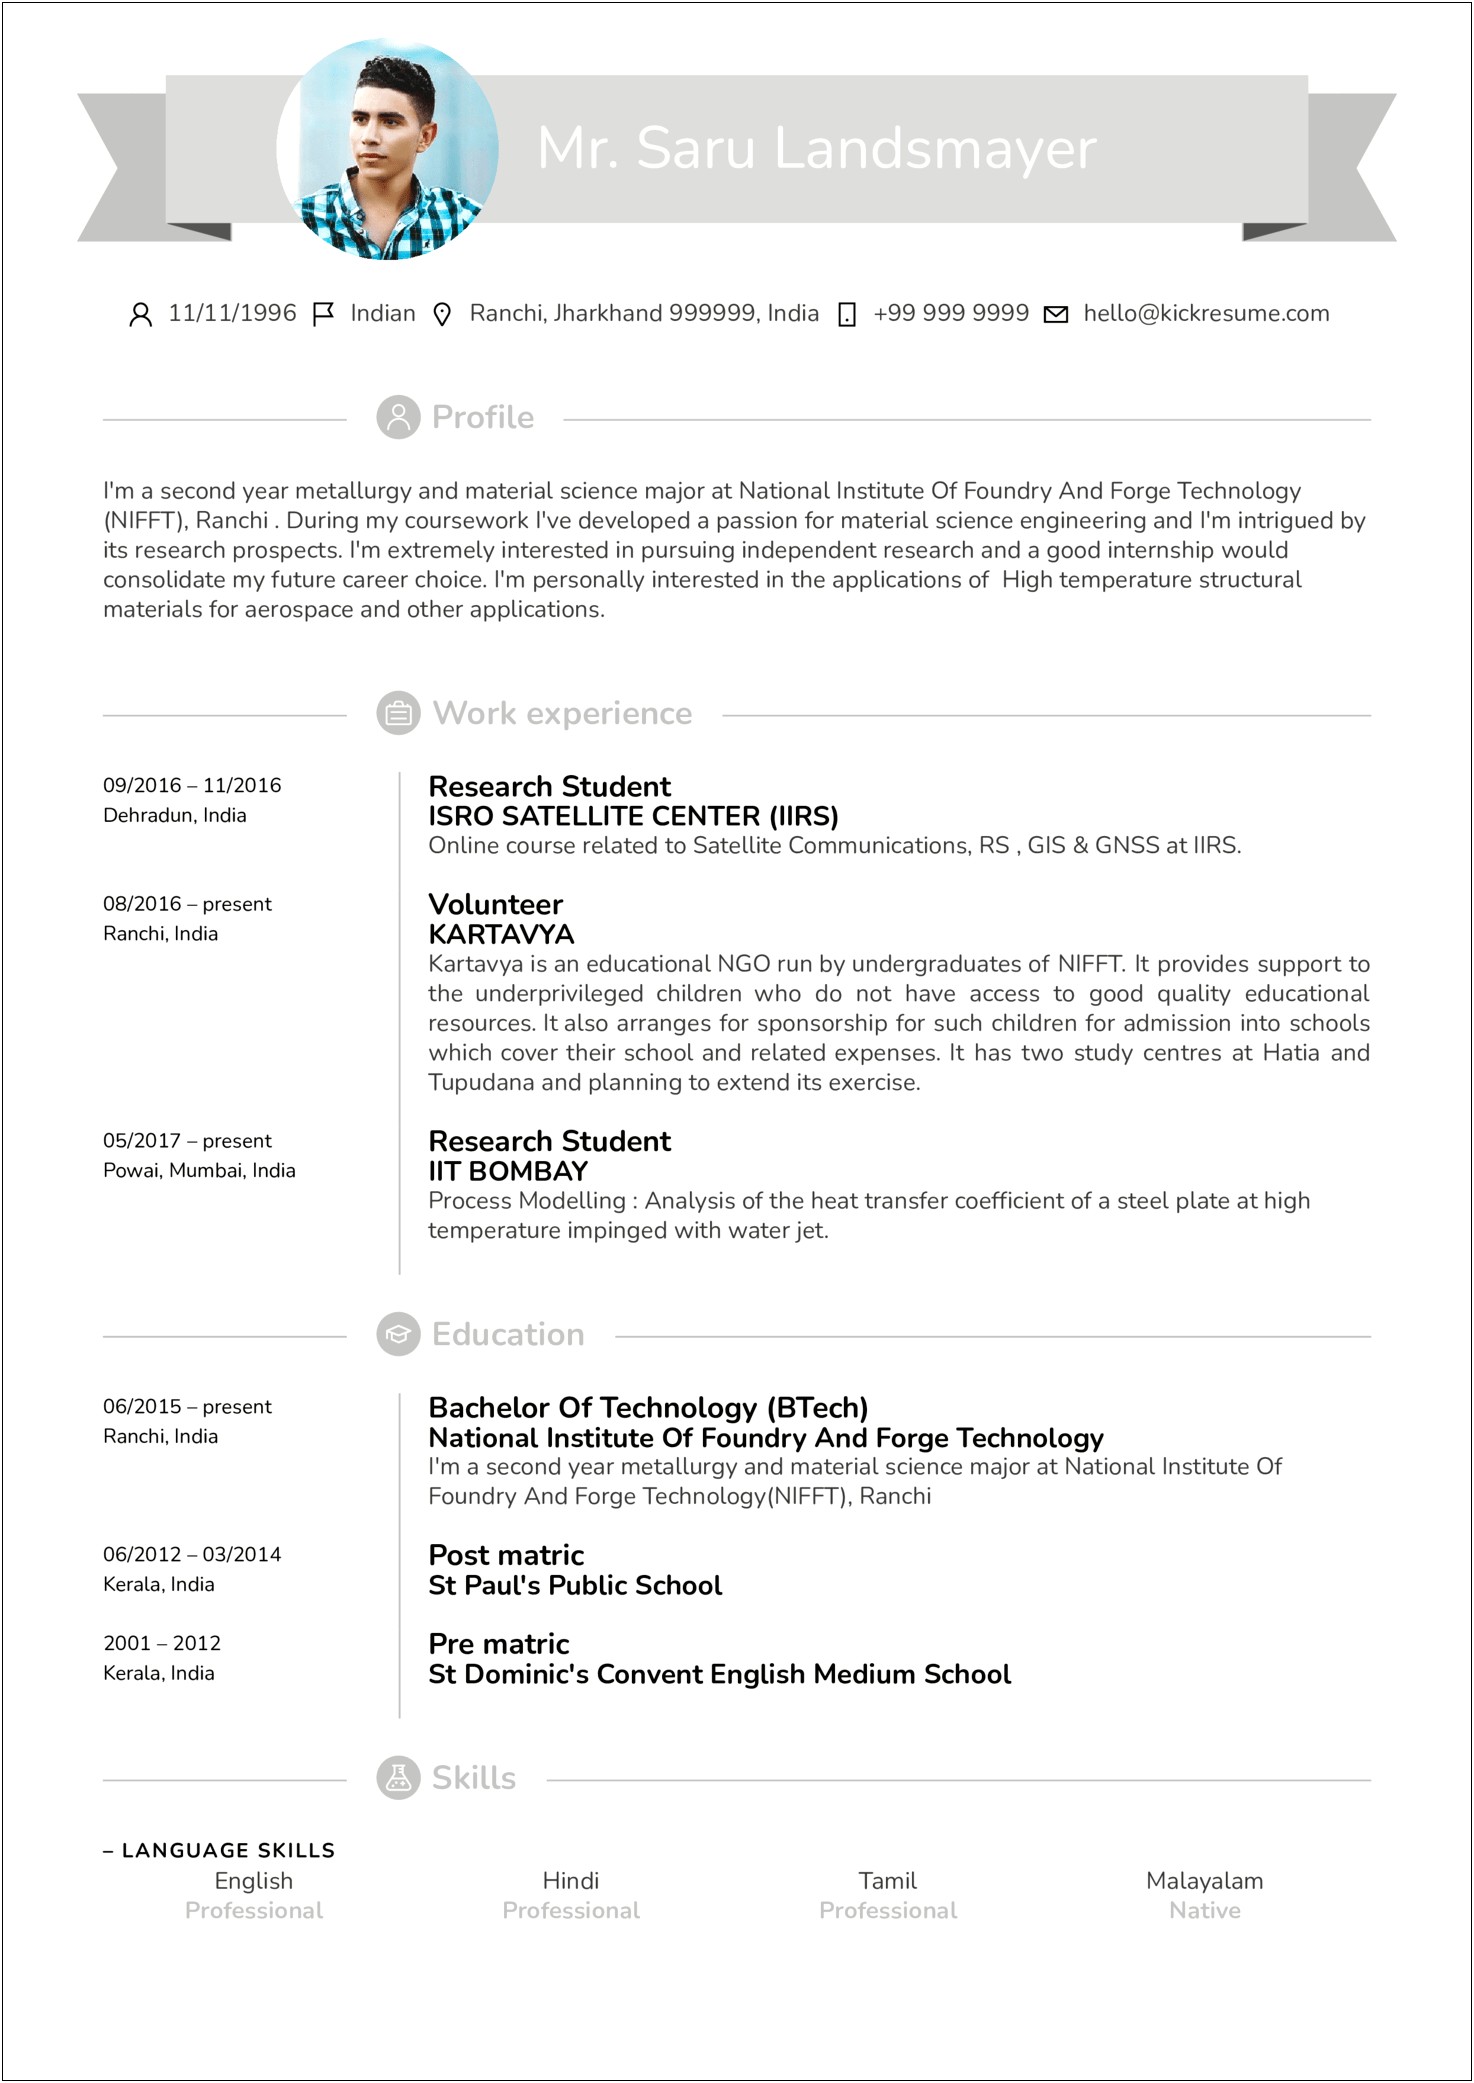 Resume Sample For College With Extership Site Information